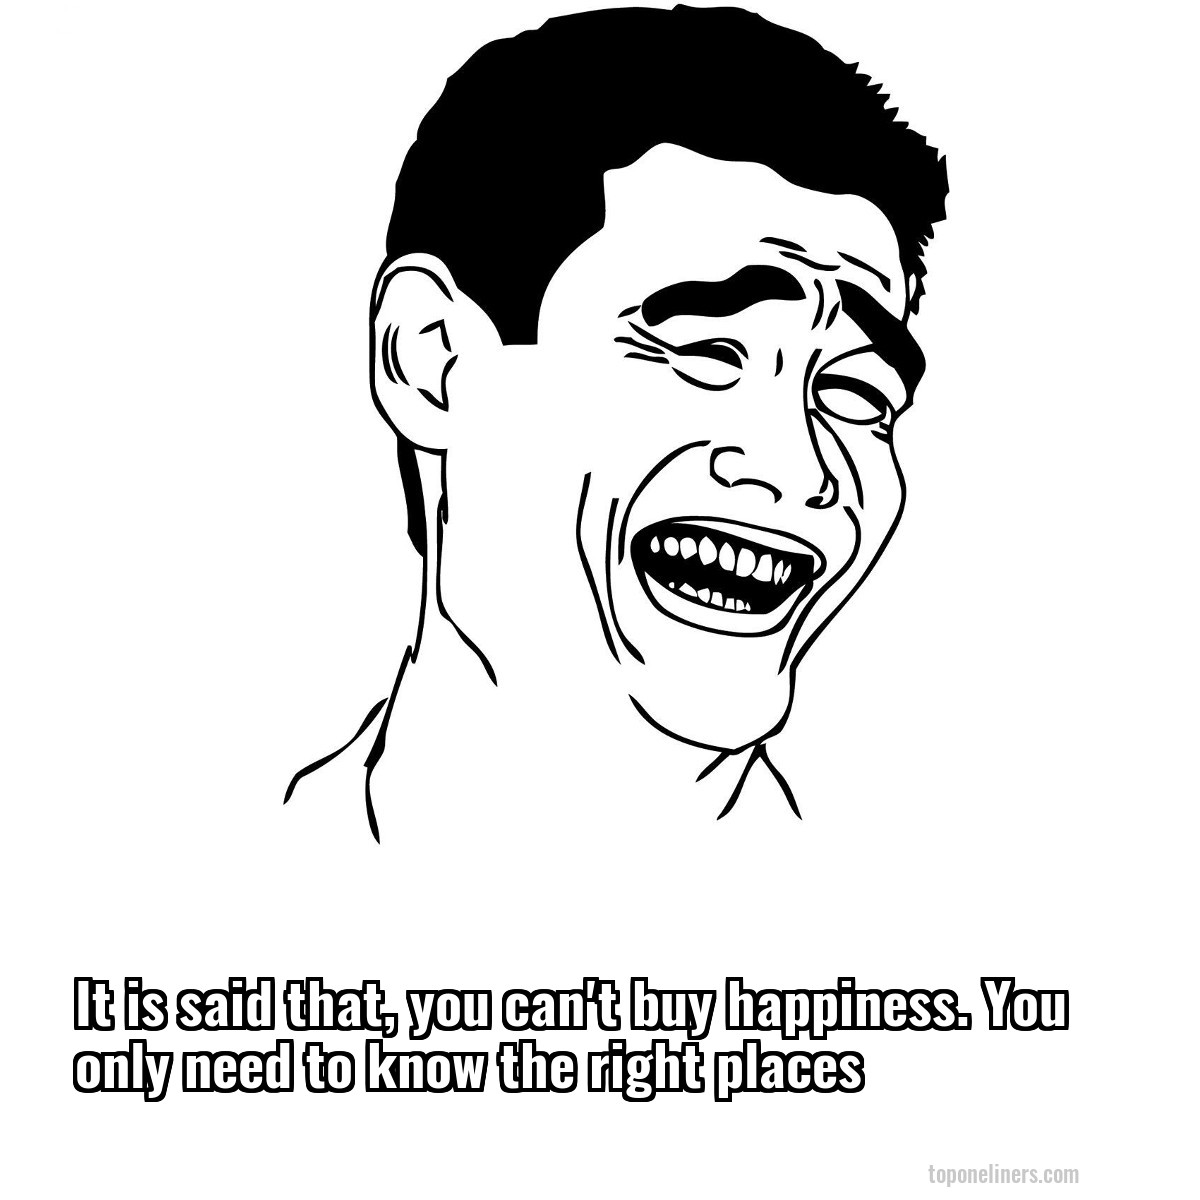 It is said that, you can't buy happiness. You only need to know the right places
